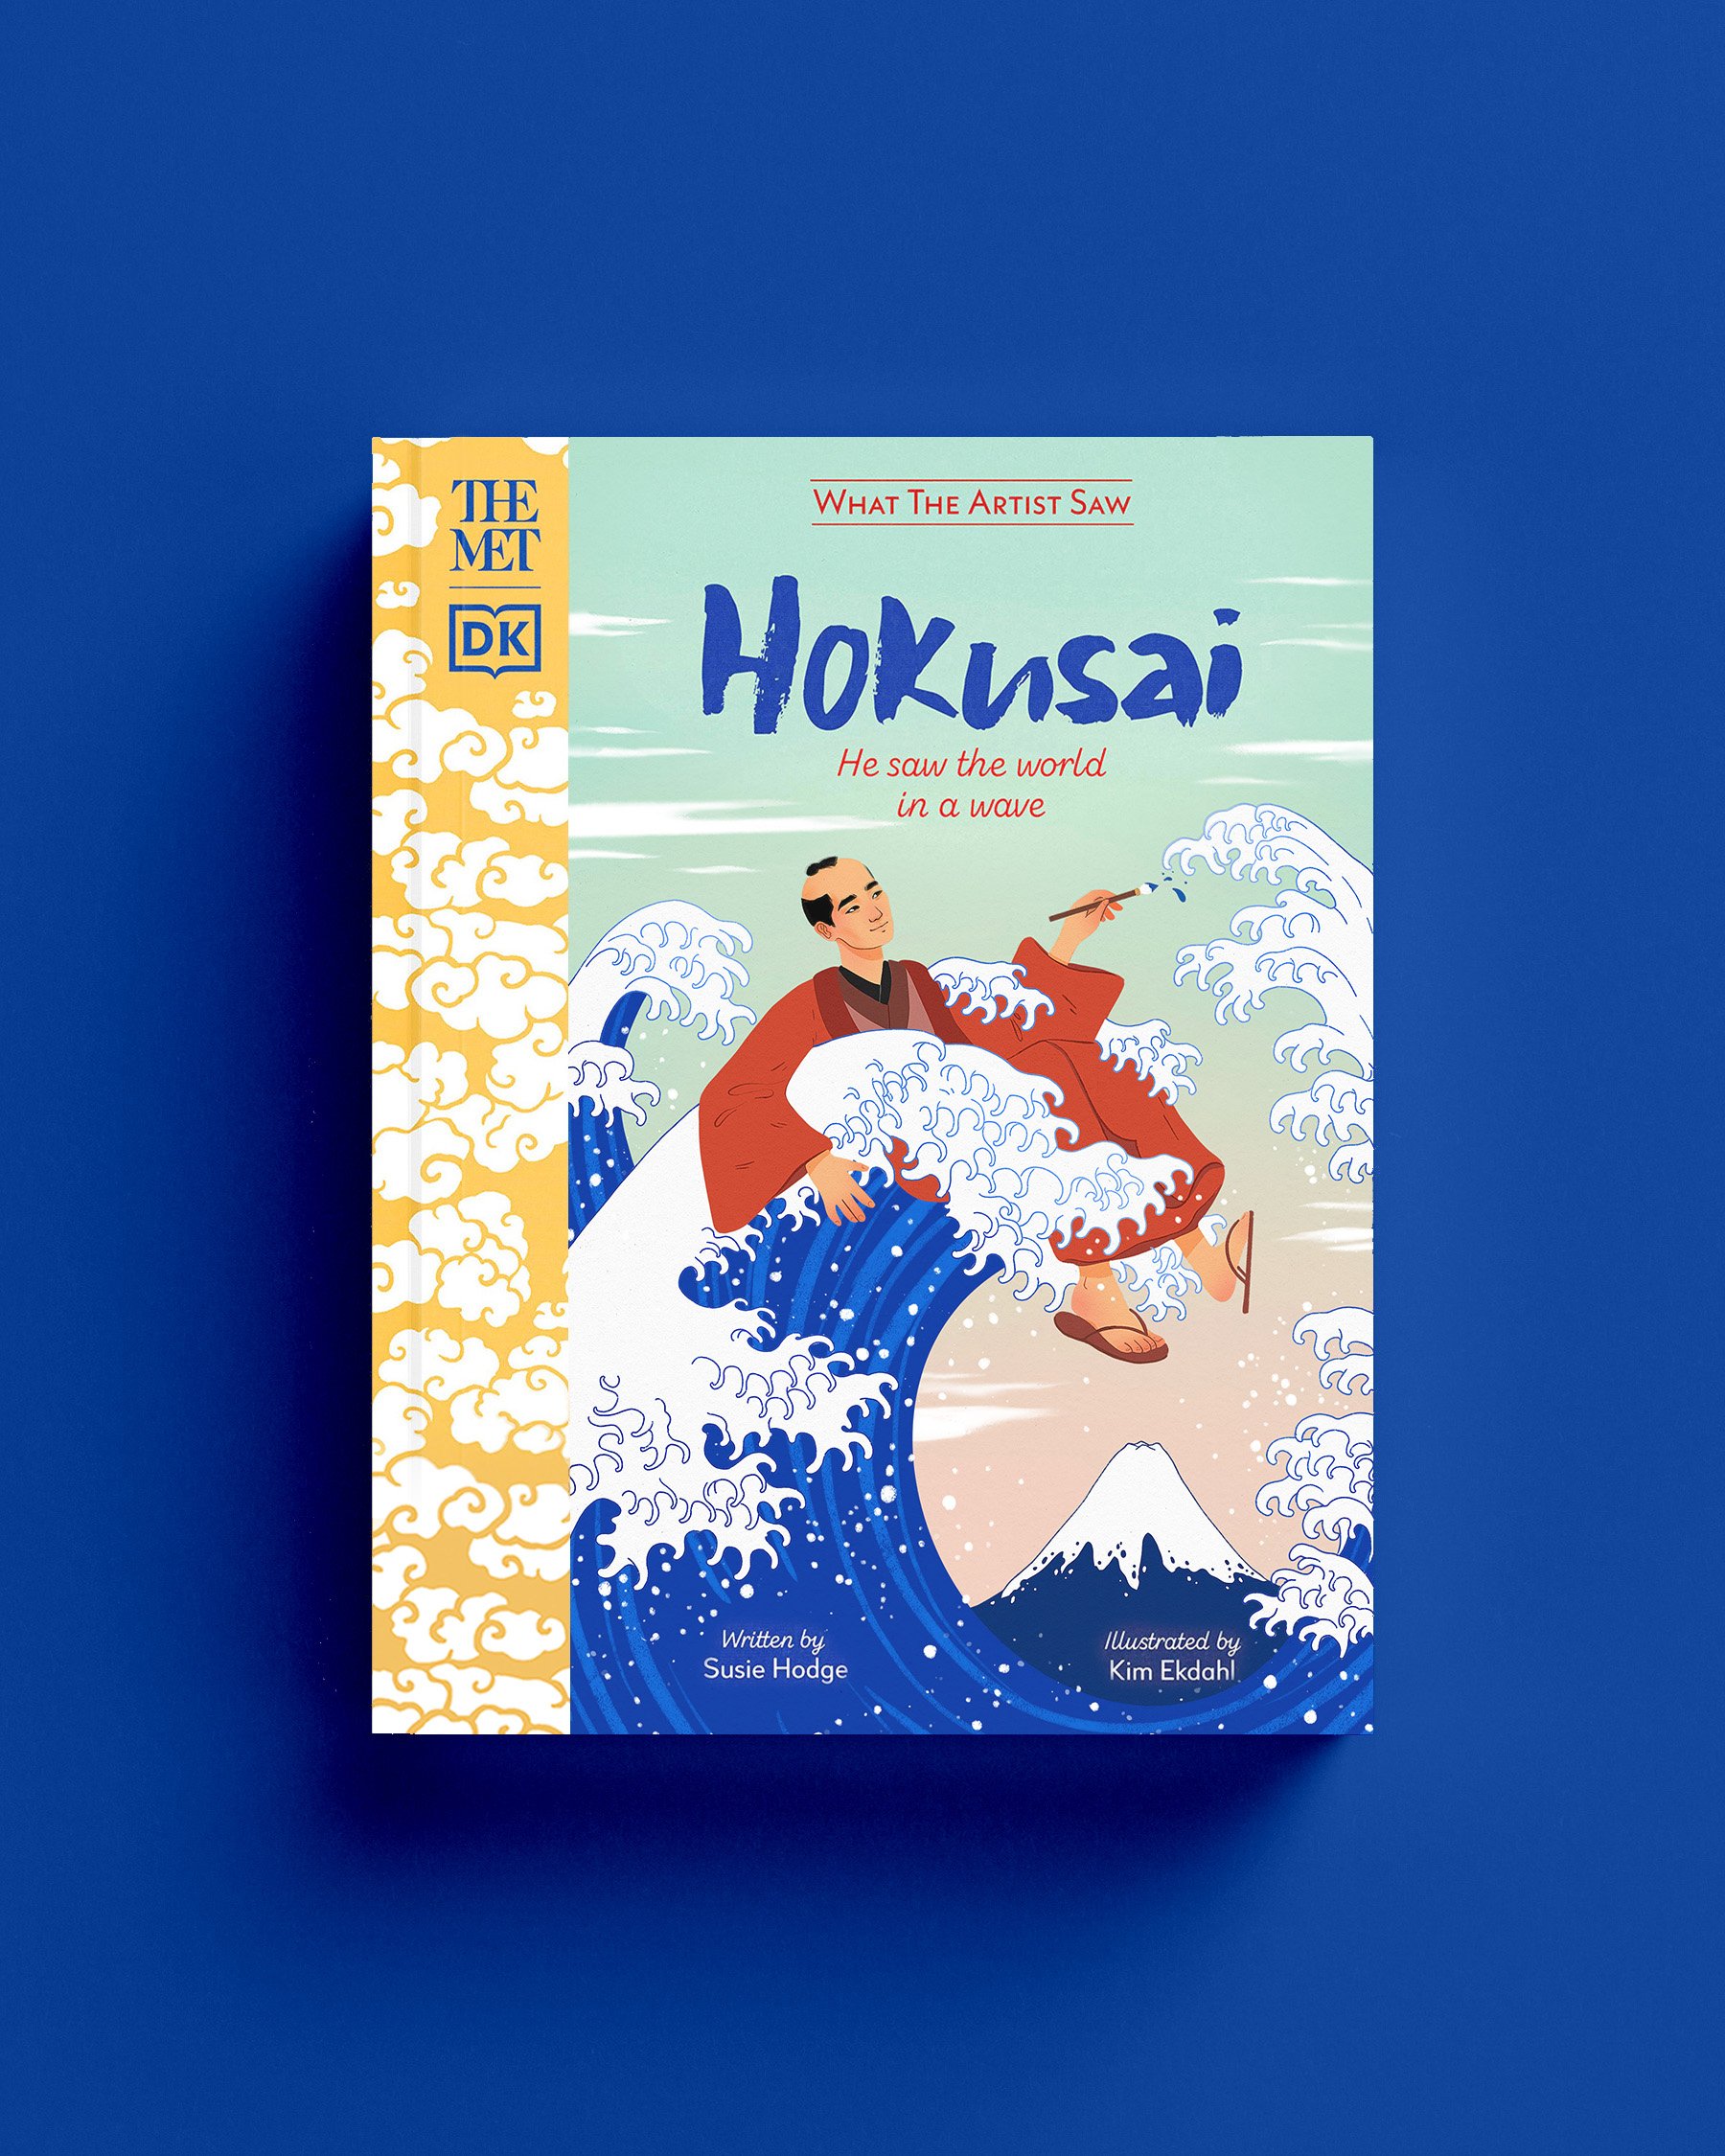 Cover for "Hokusai-what the artist saw" by Susie Hodge